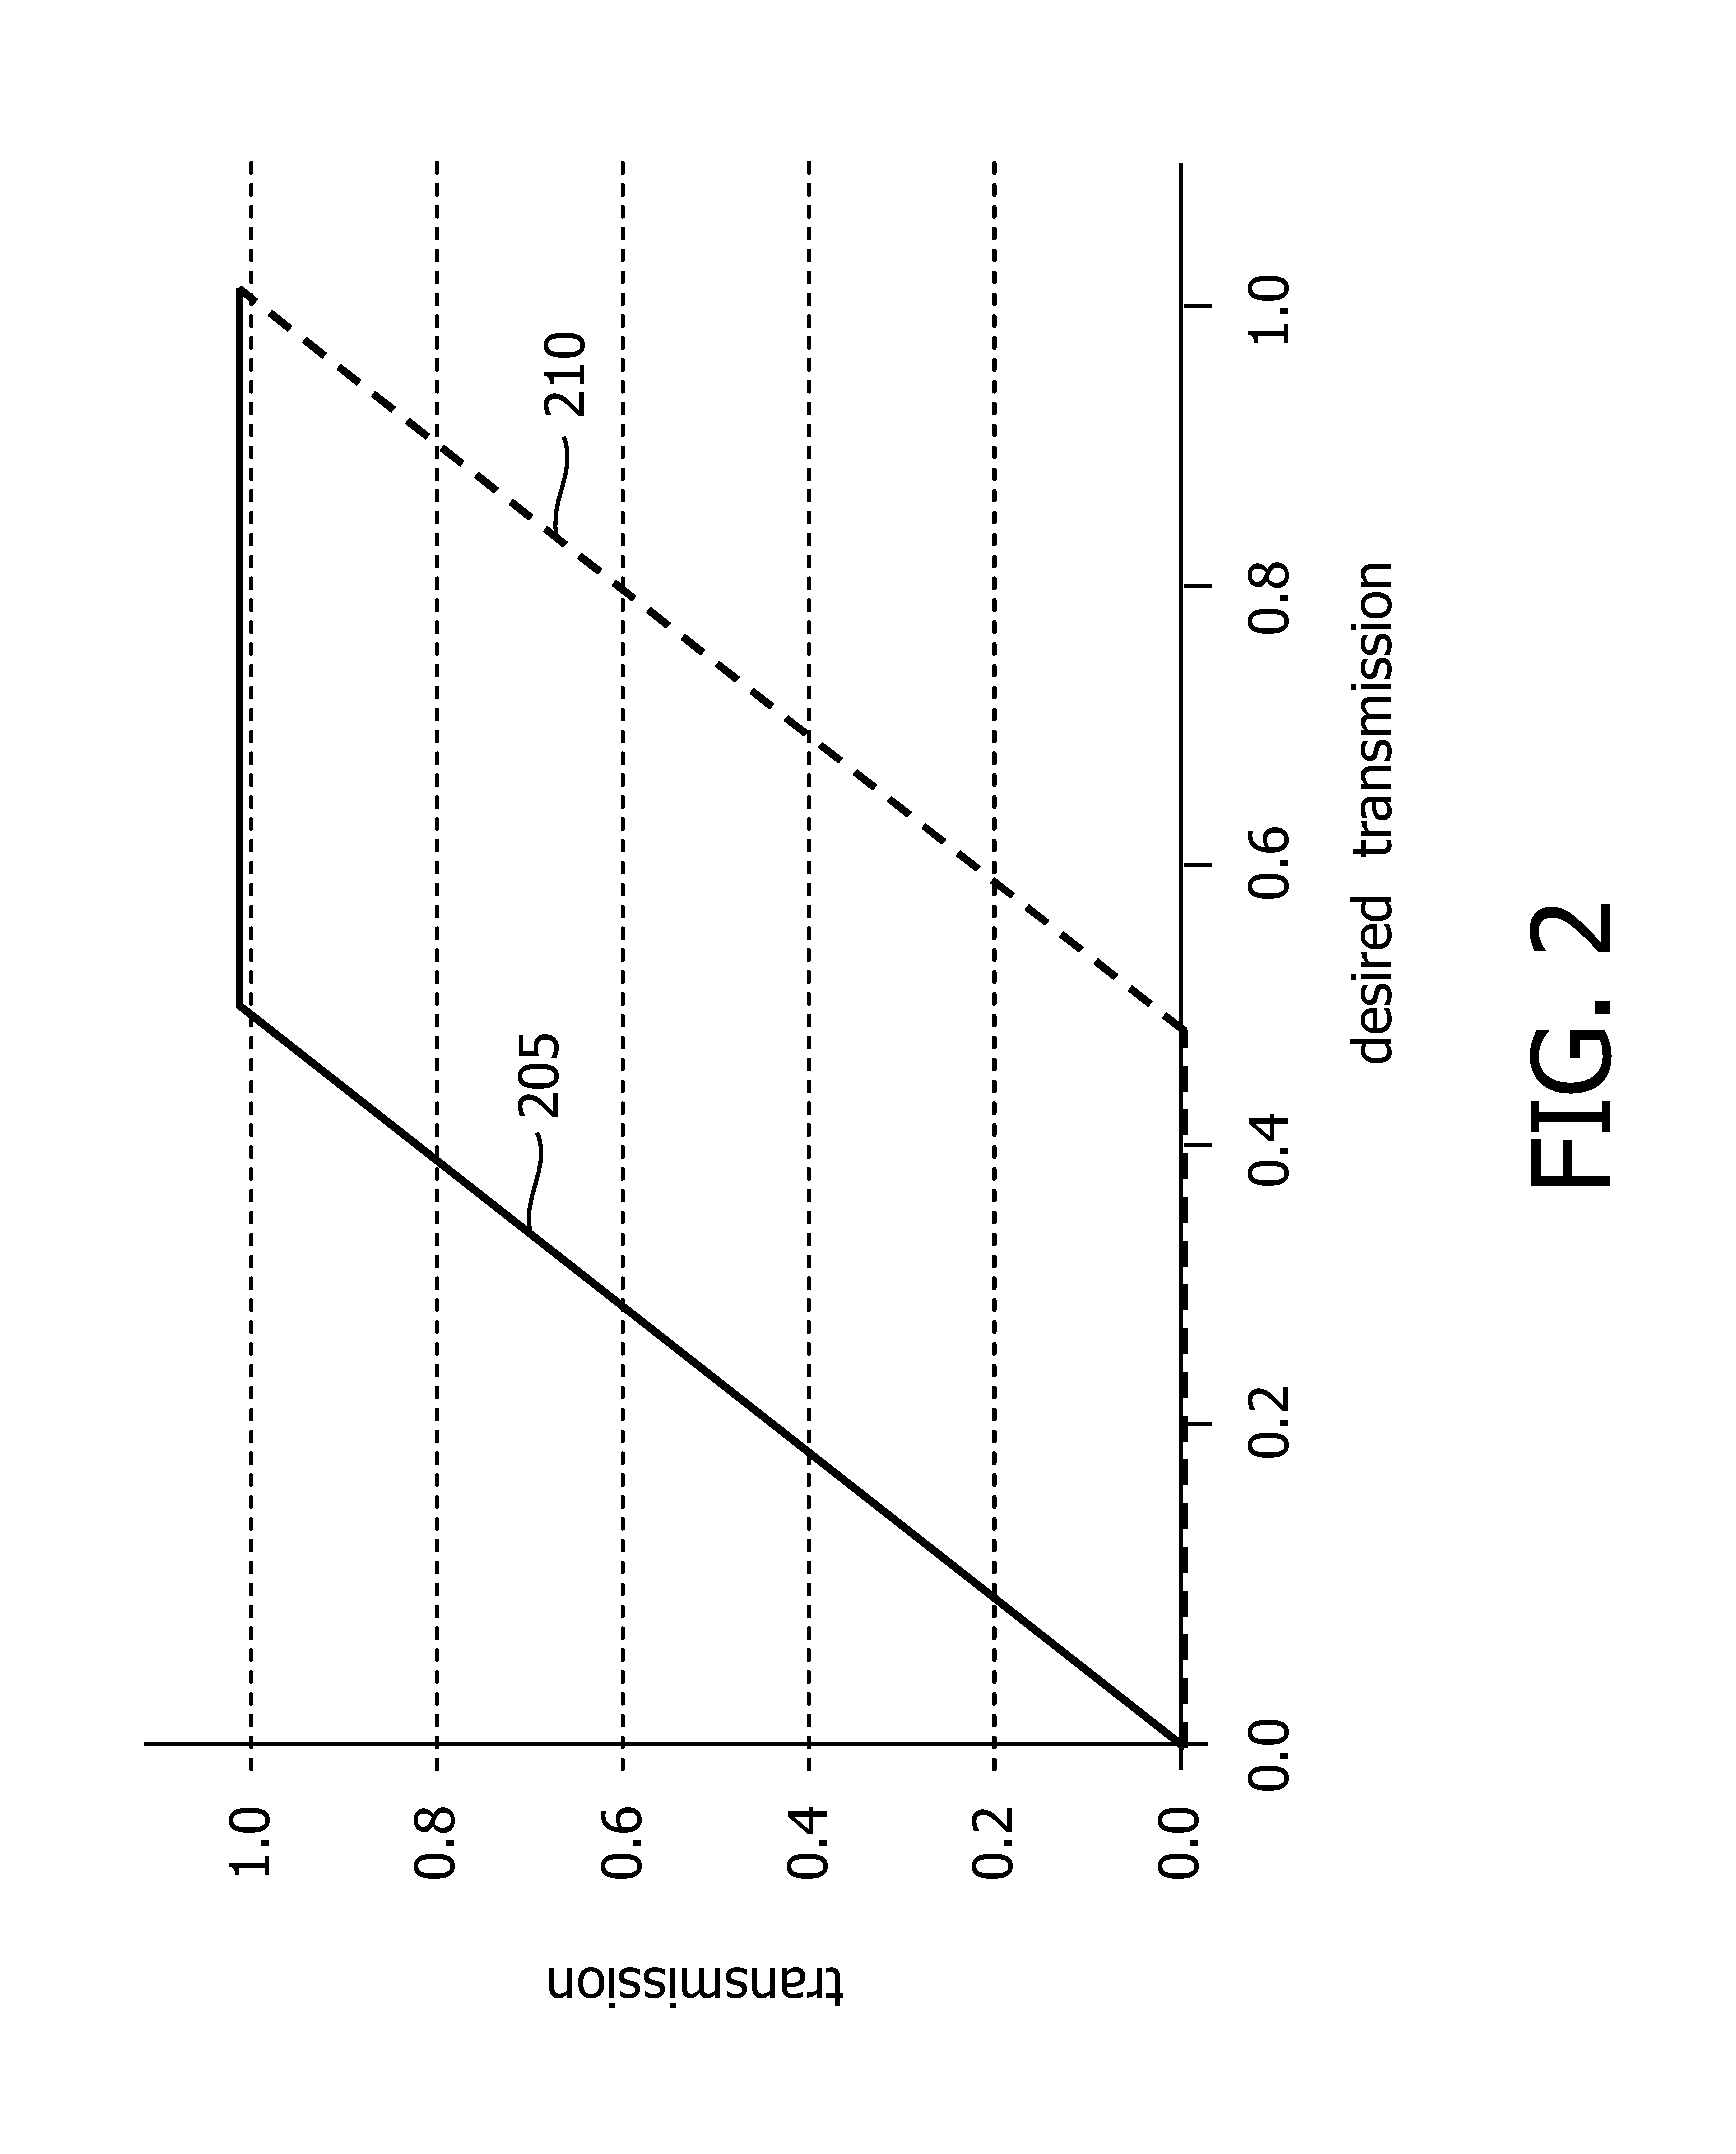 Method and device for providing privacy on a display